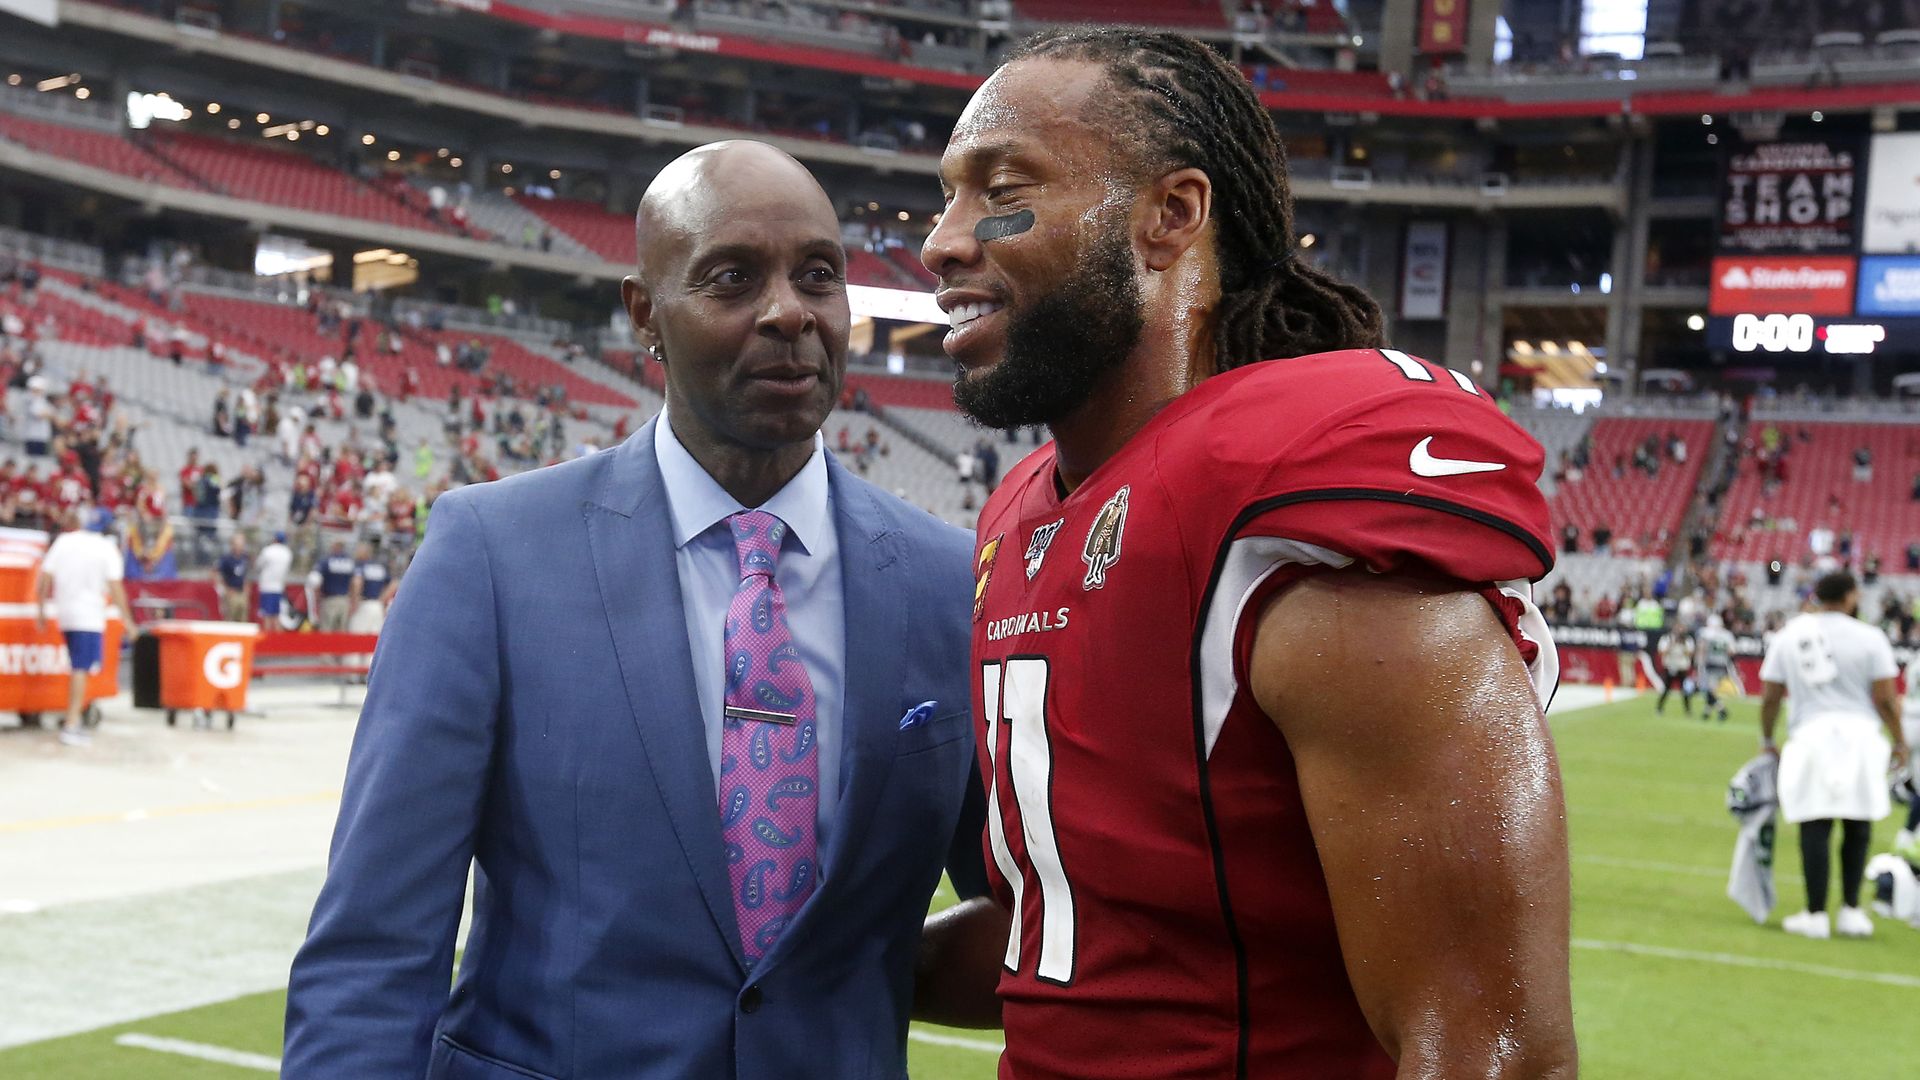 Jerry Rice and Larry Fitzgerald